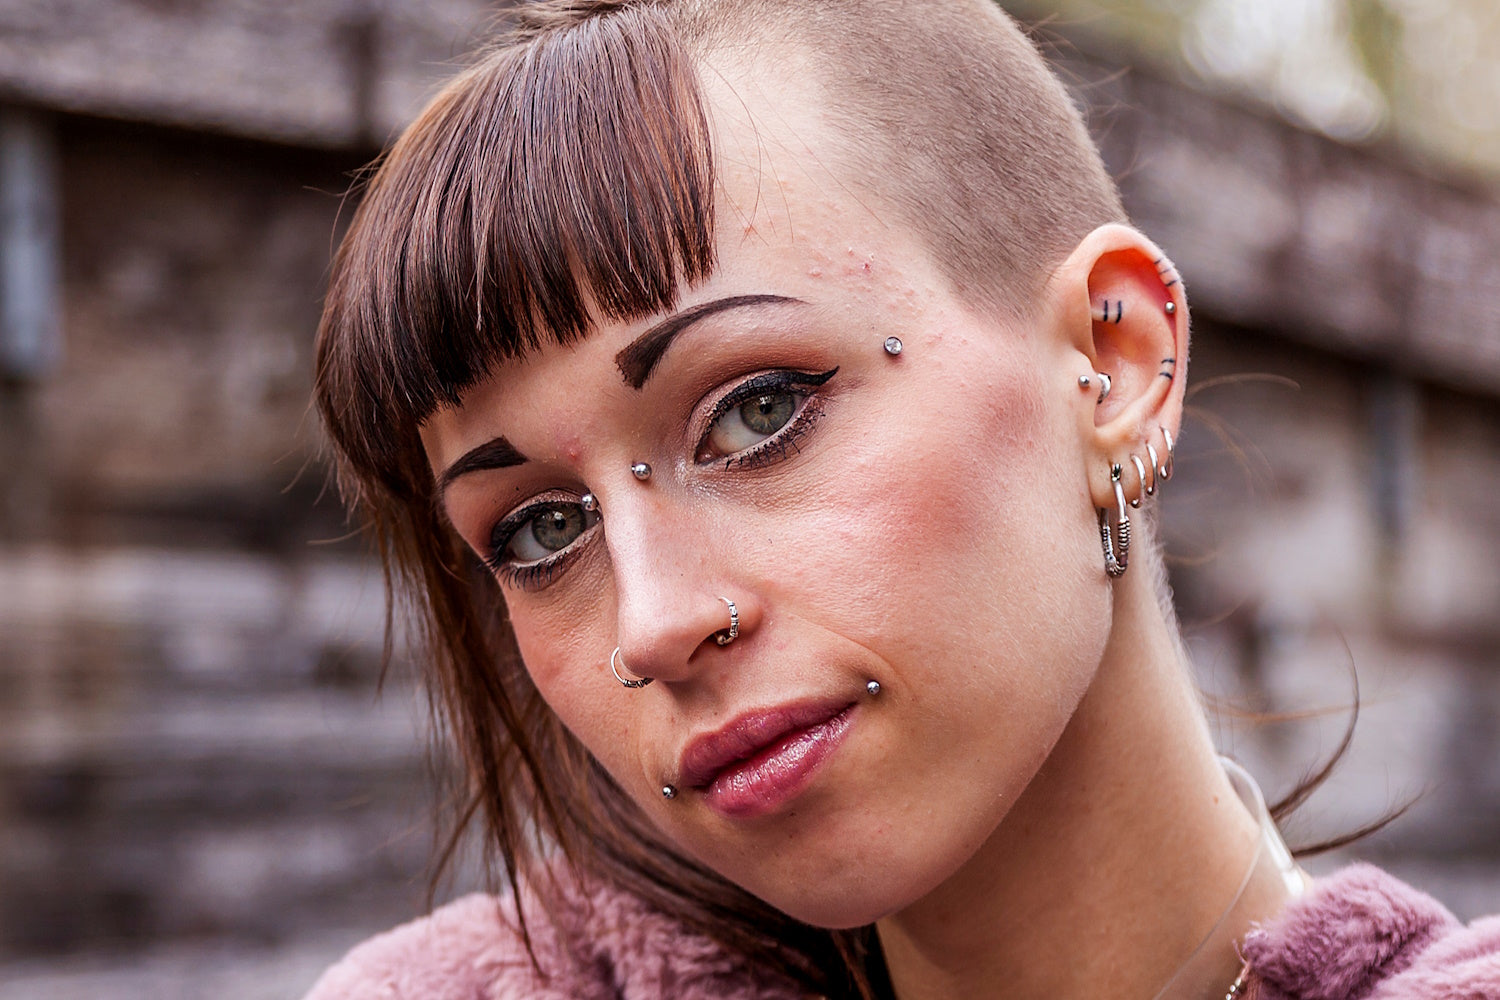 The face of a young woman with a bridge piercing along with many other piercings on her face and ears.